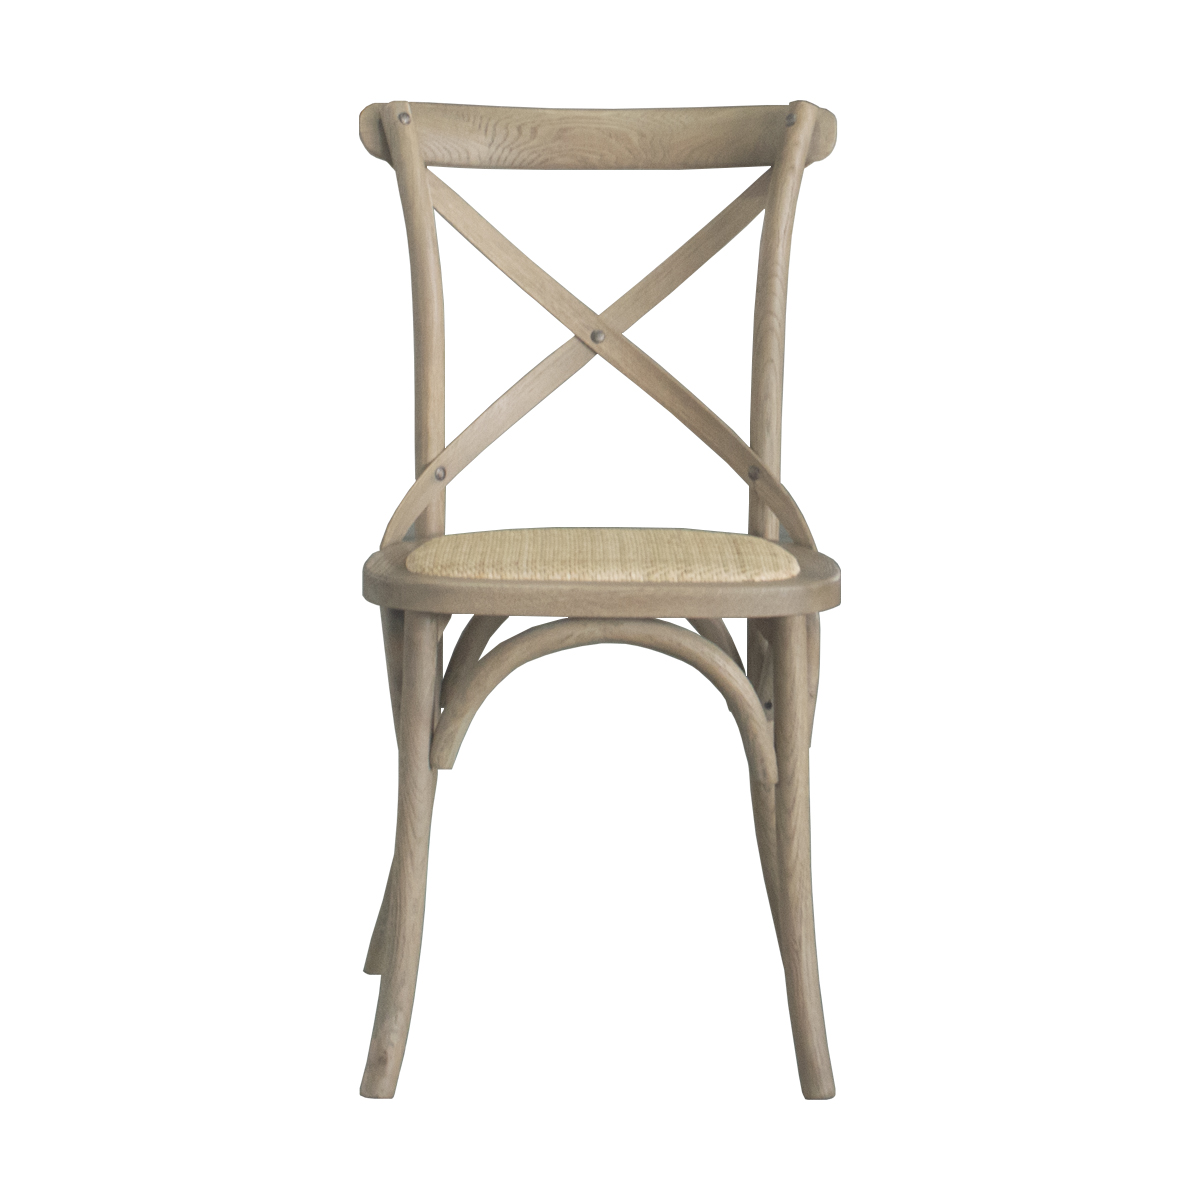 French-style cross back dining chair ED-024